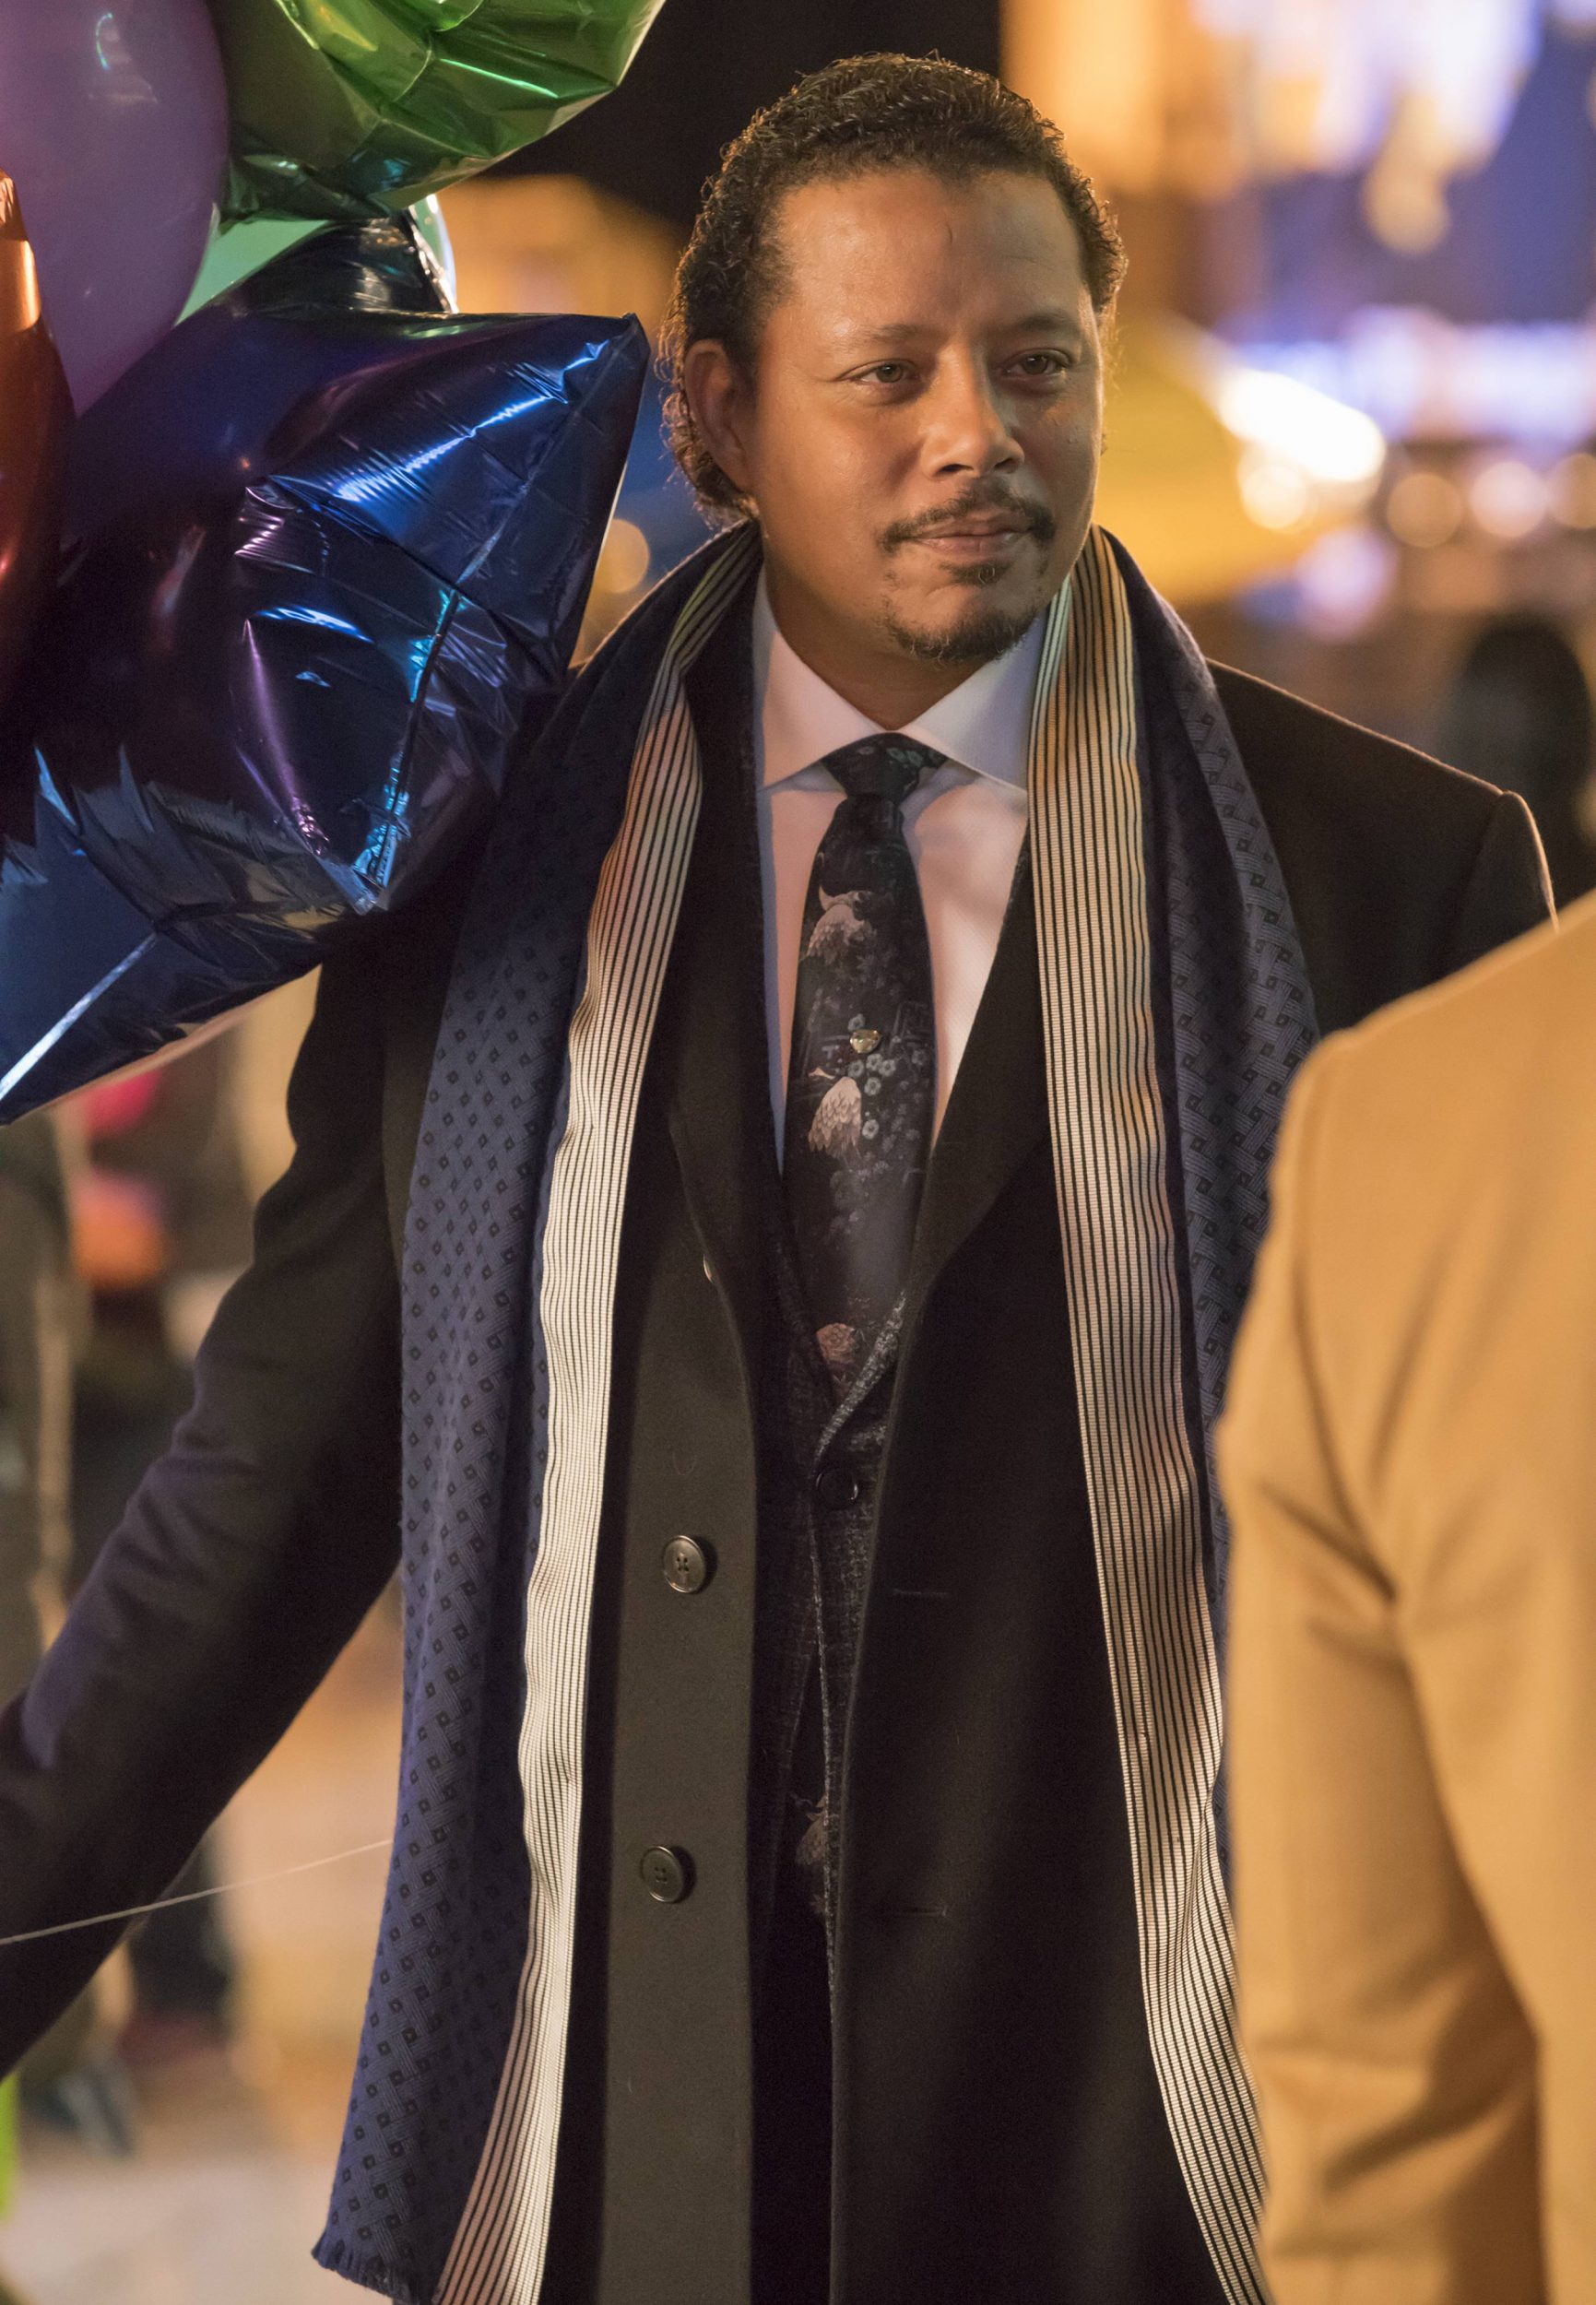 EMPIRE: Terrence Howard in the "A Furnace For your Foe" fall finale episode of EMPIRE airing Dec. 14 (8:00-9:00 PM ET/PT) on FOX. ©2016 Fox Broadcasting Co. CR: Chuck Hodes/FOX